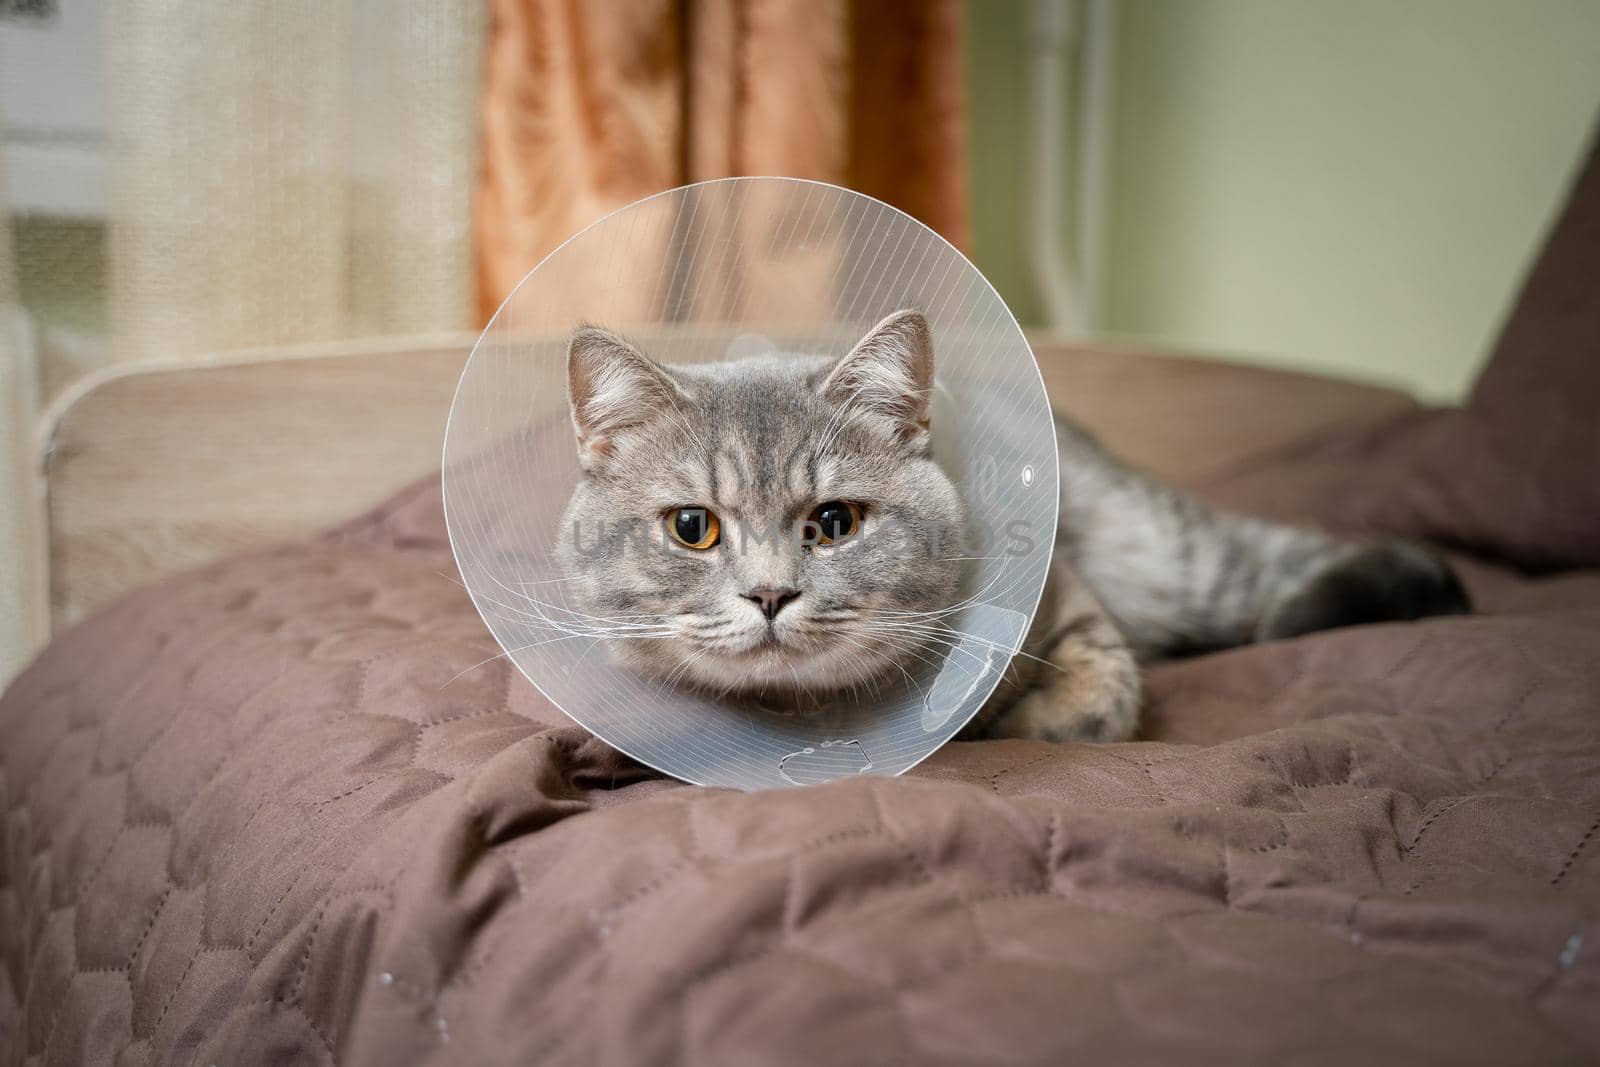 A gray Scottish straight-eared cat in a platsik veterinary collar after surgery lies sad at home on the couch. Exhausted British breed cat with vet Elizabethan collar to prevent licking wounds at home